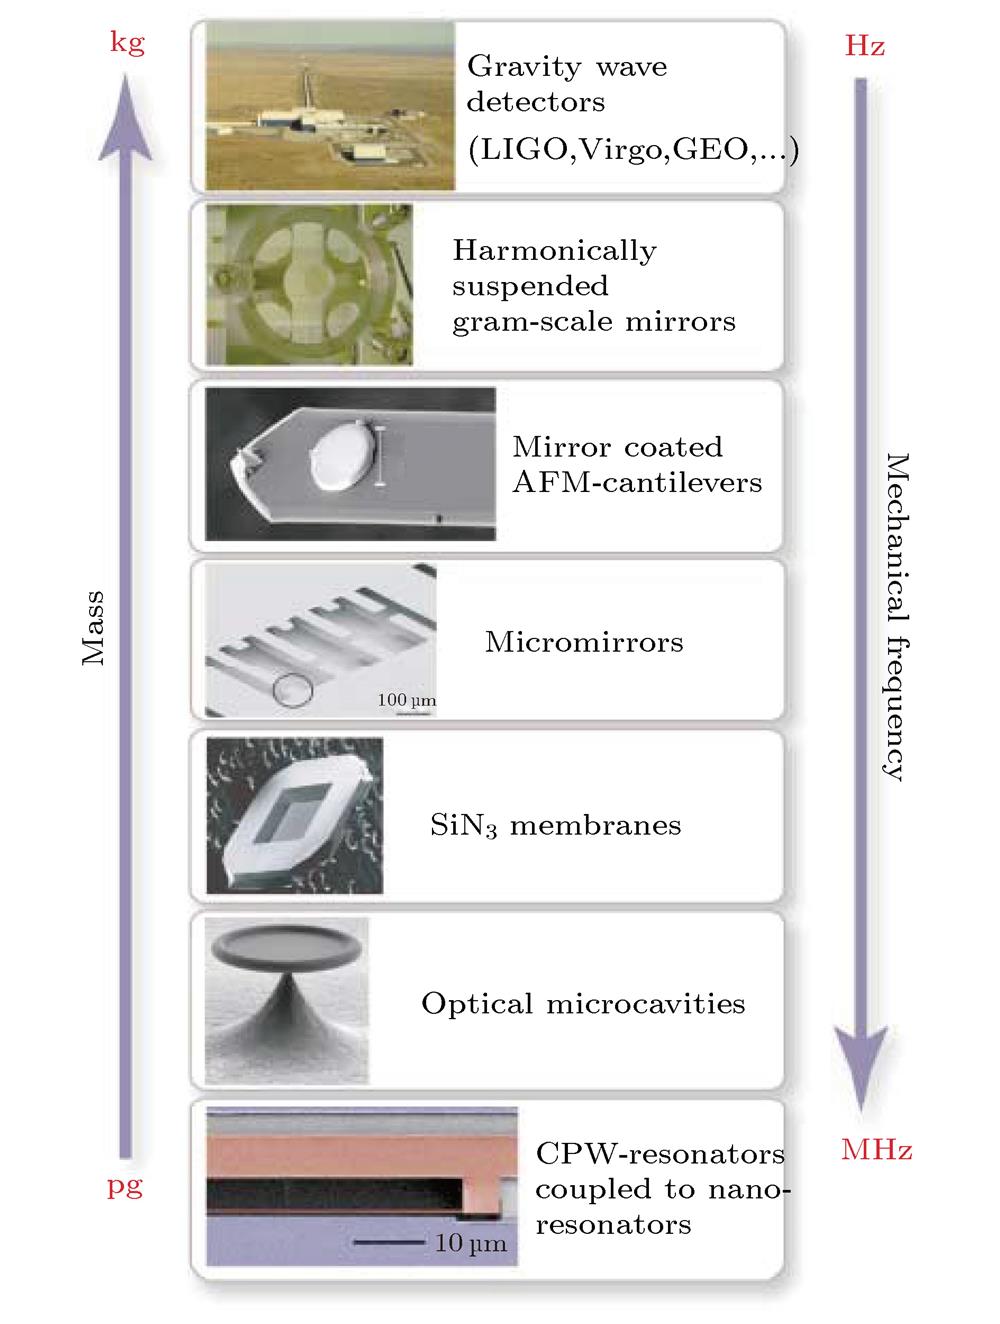 Cavity optomechanical systems with different mecha-nical vibration frequencies and masses[39].